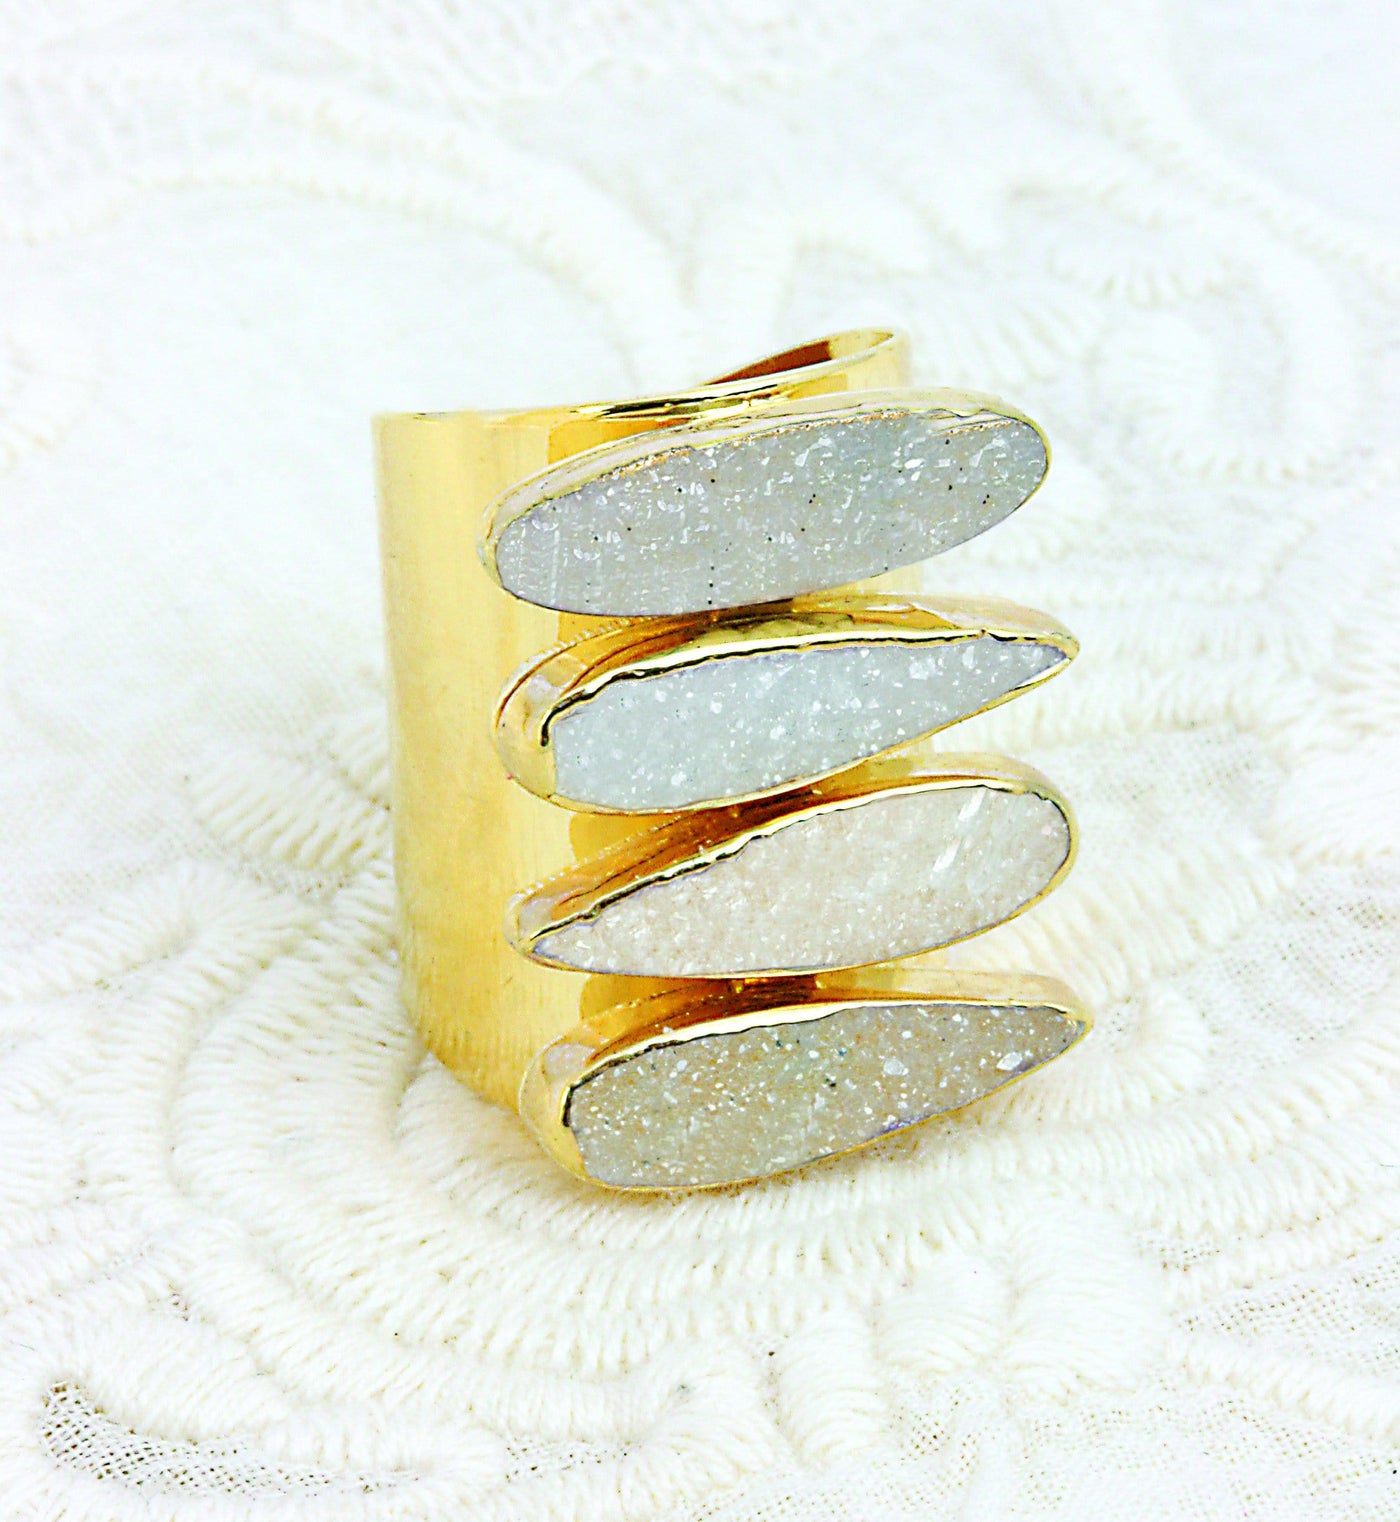 View of the Natural Druzy Adjustable Teardrop Druzy Ring with Electroplated 24k Gold Adjustable Cigar Band